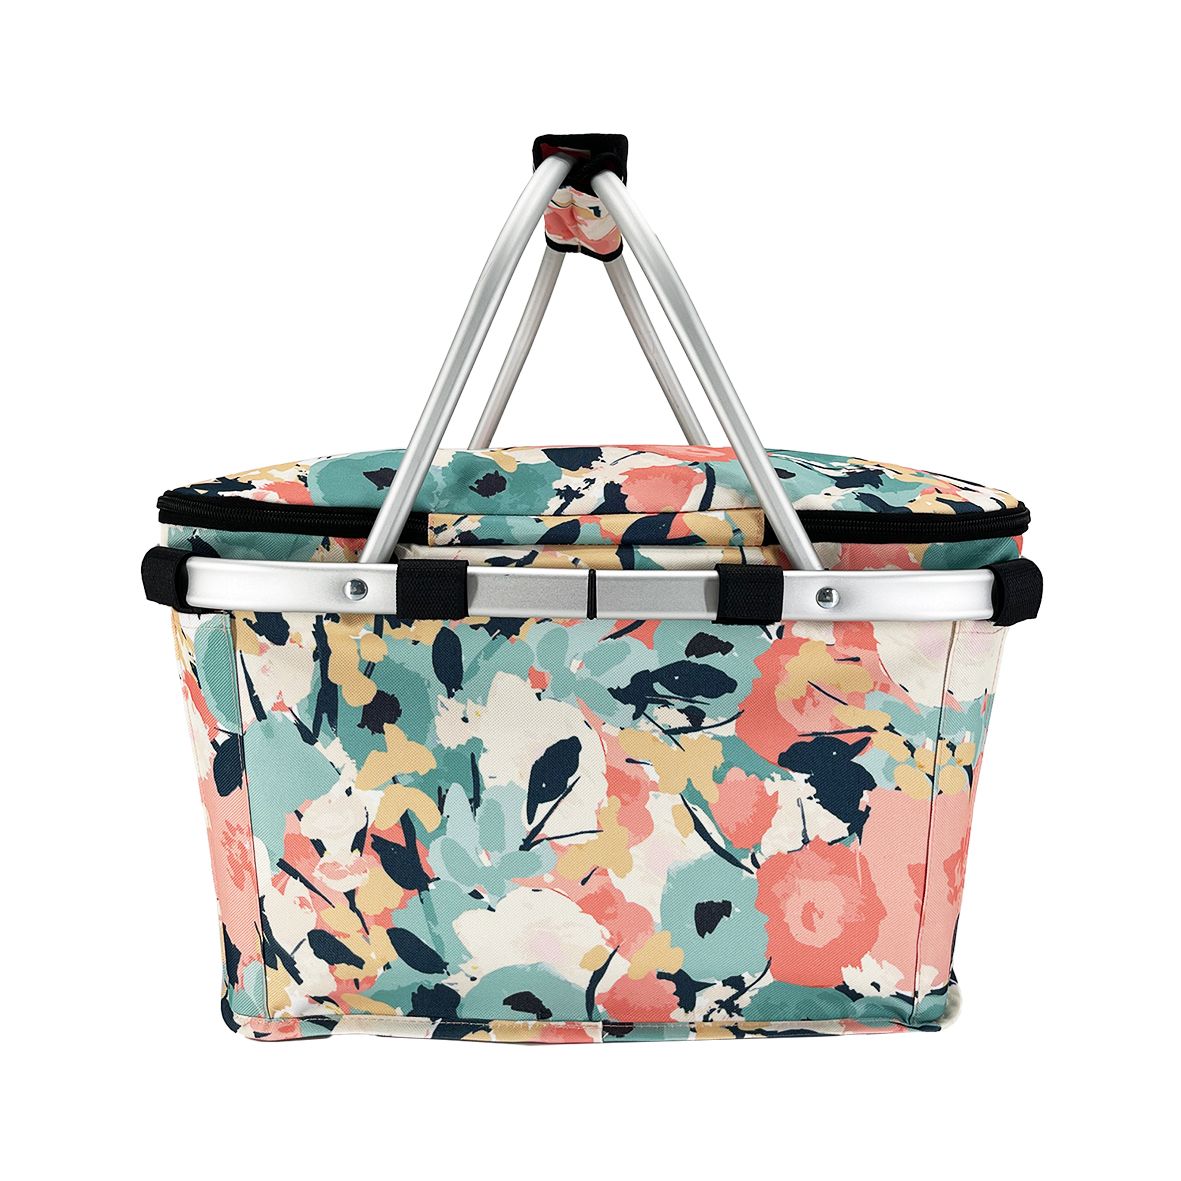 Insulated Carry Basket - Pastel Blooms